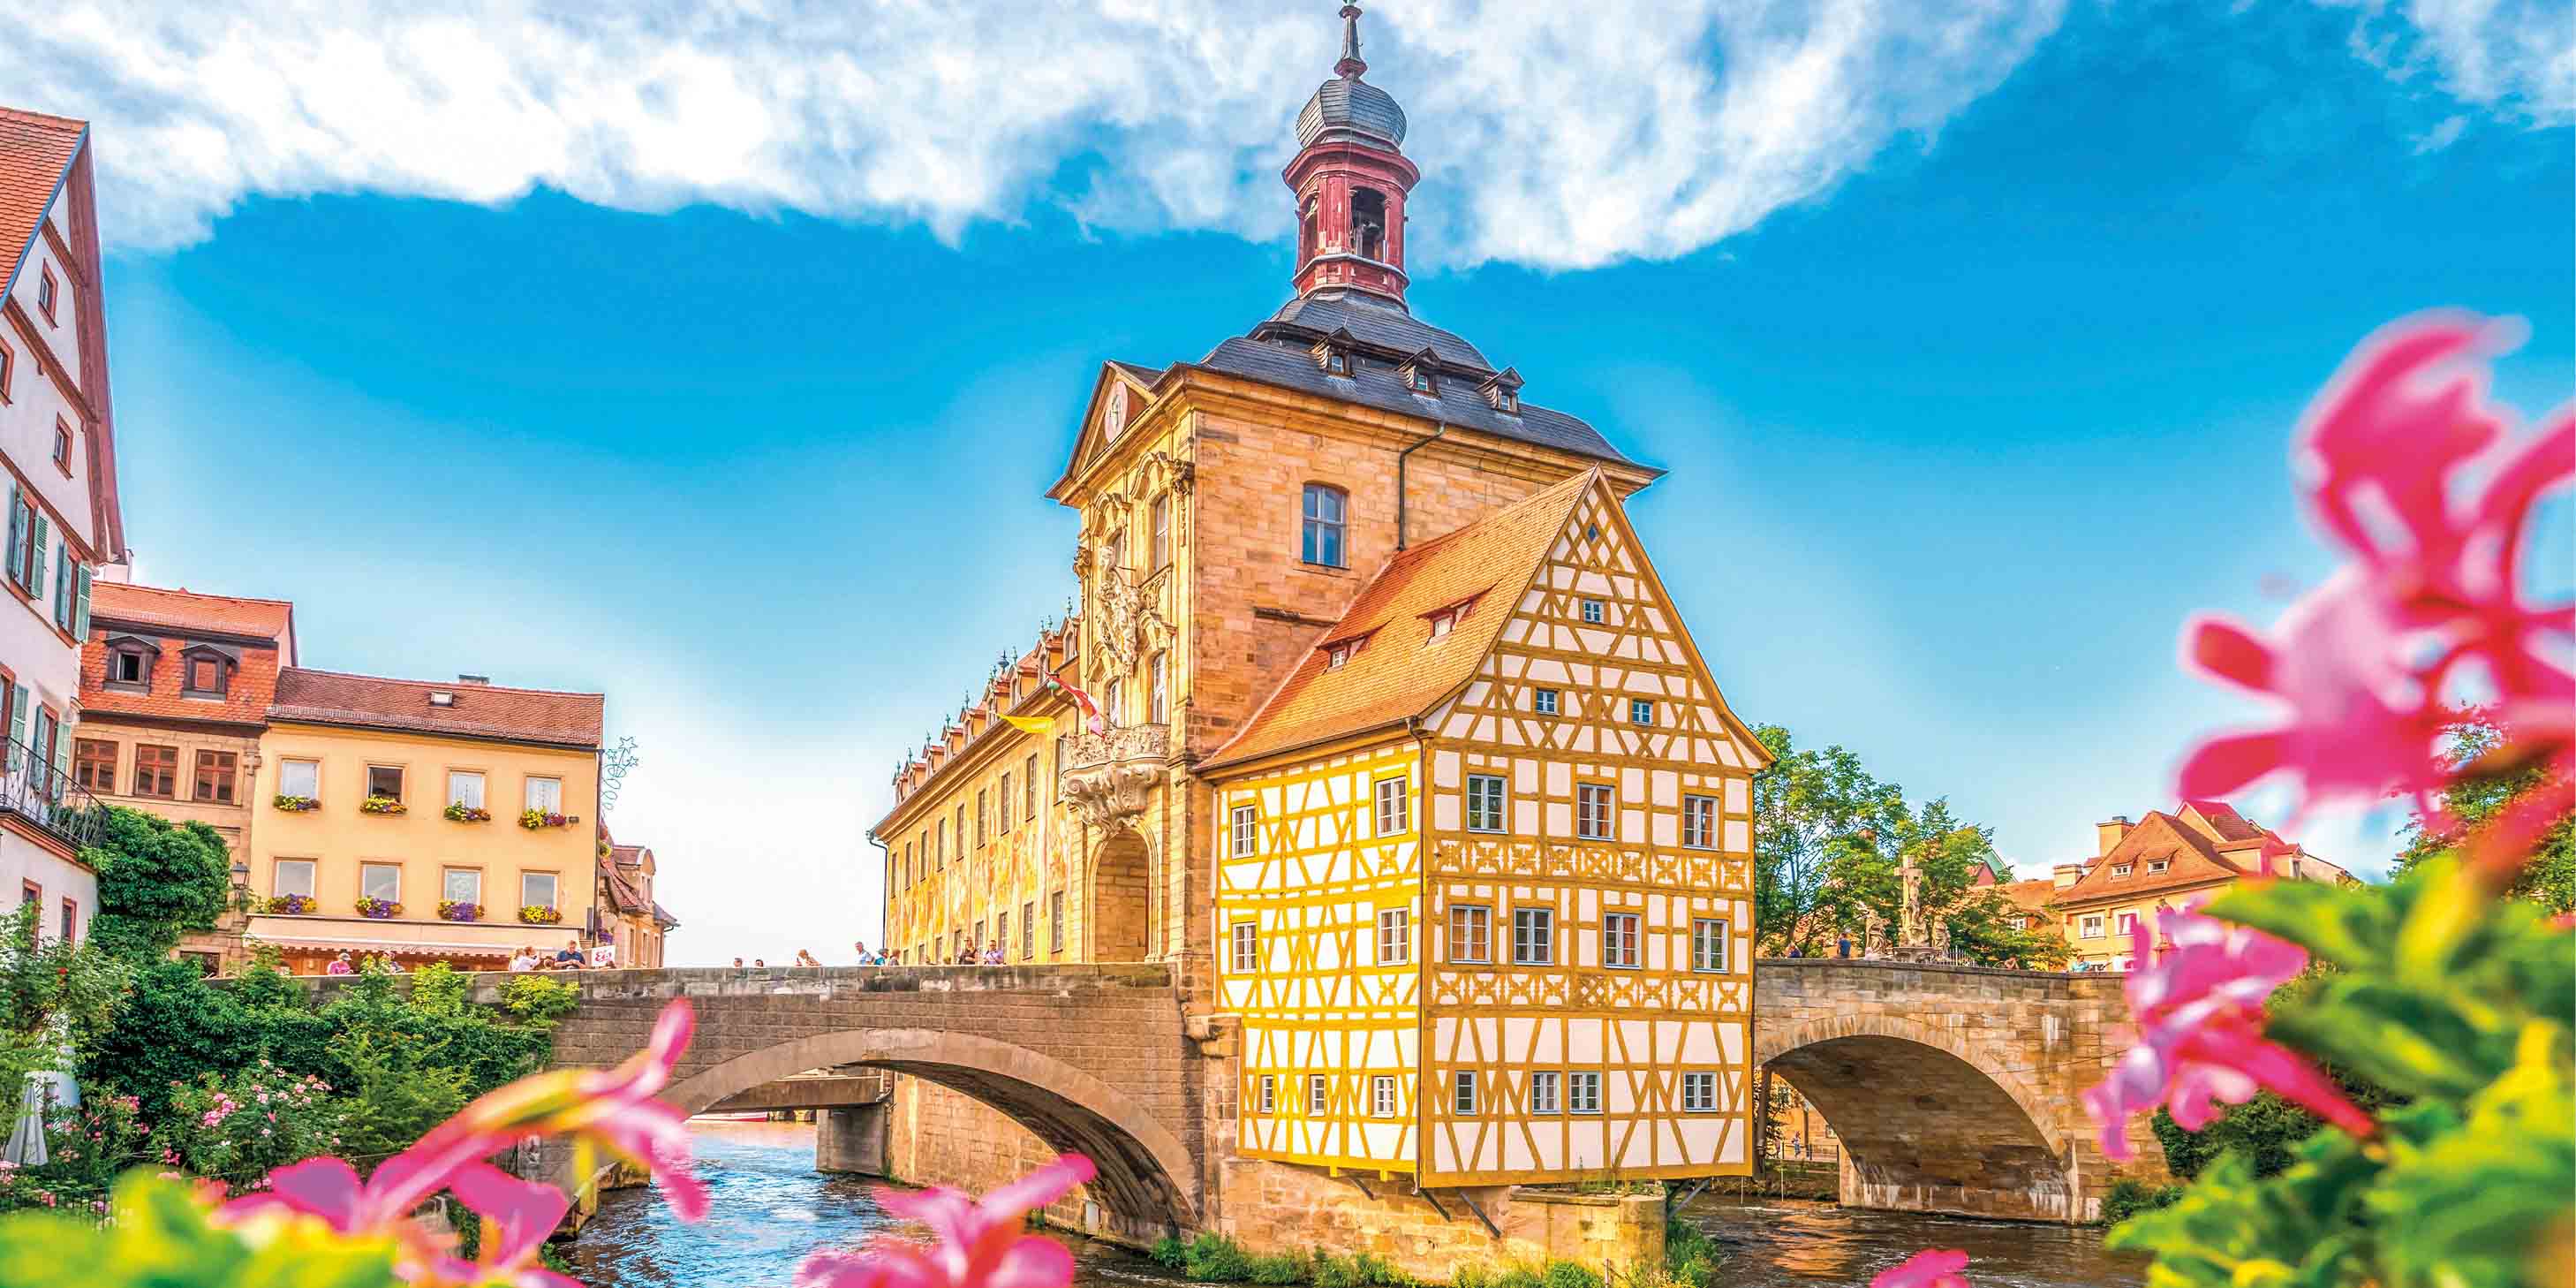 A spring image of Bamberg Bridge, Germany. The sky is blue and pink flowers can be seen in the foreground.